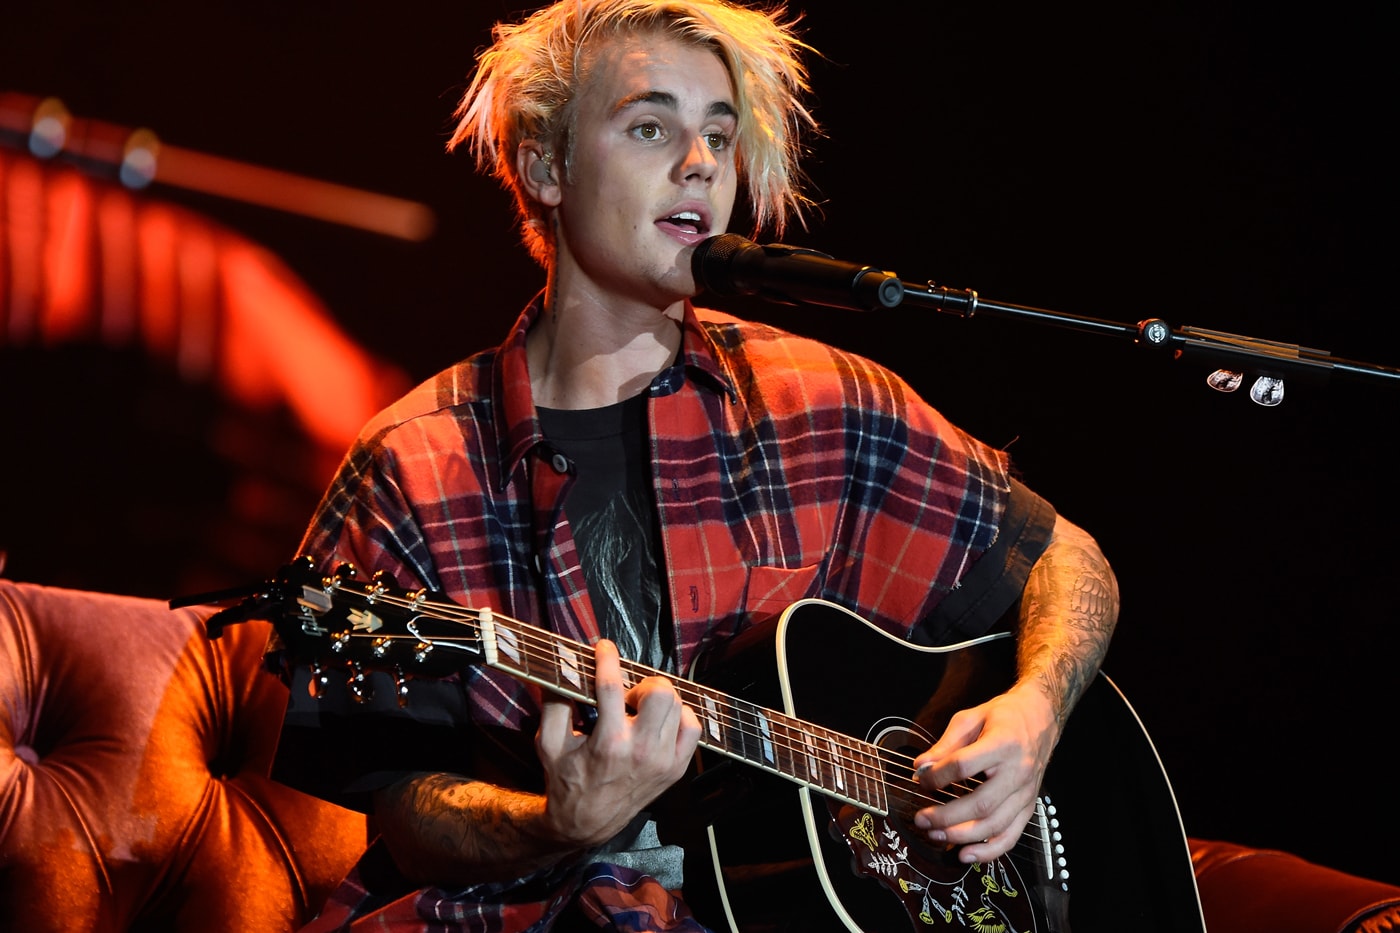 Watch Justin Bieber & Jack U Perform "Love Yourself" & "Where Are U Now" at the GRAMMYs